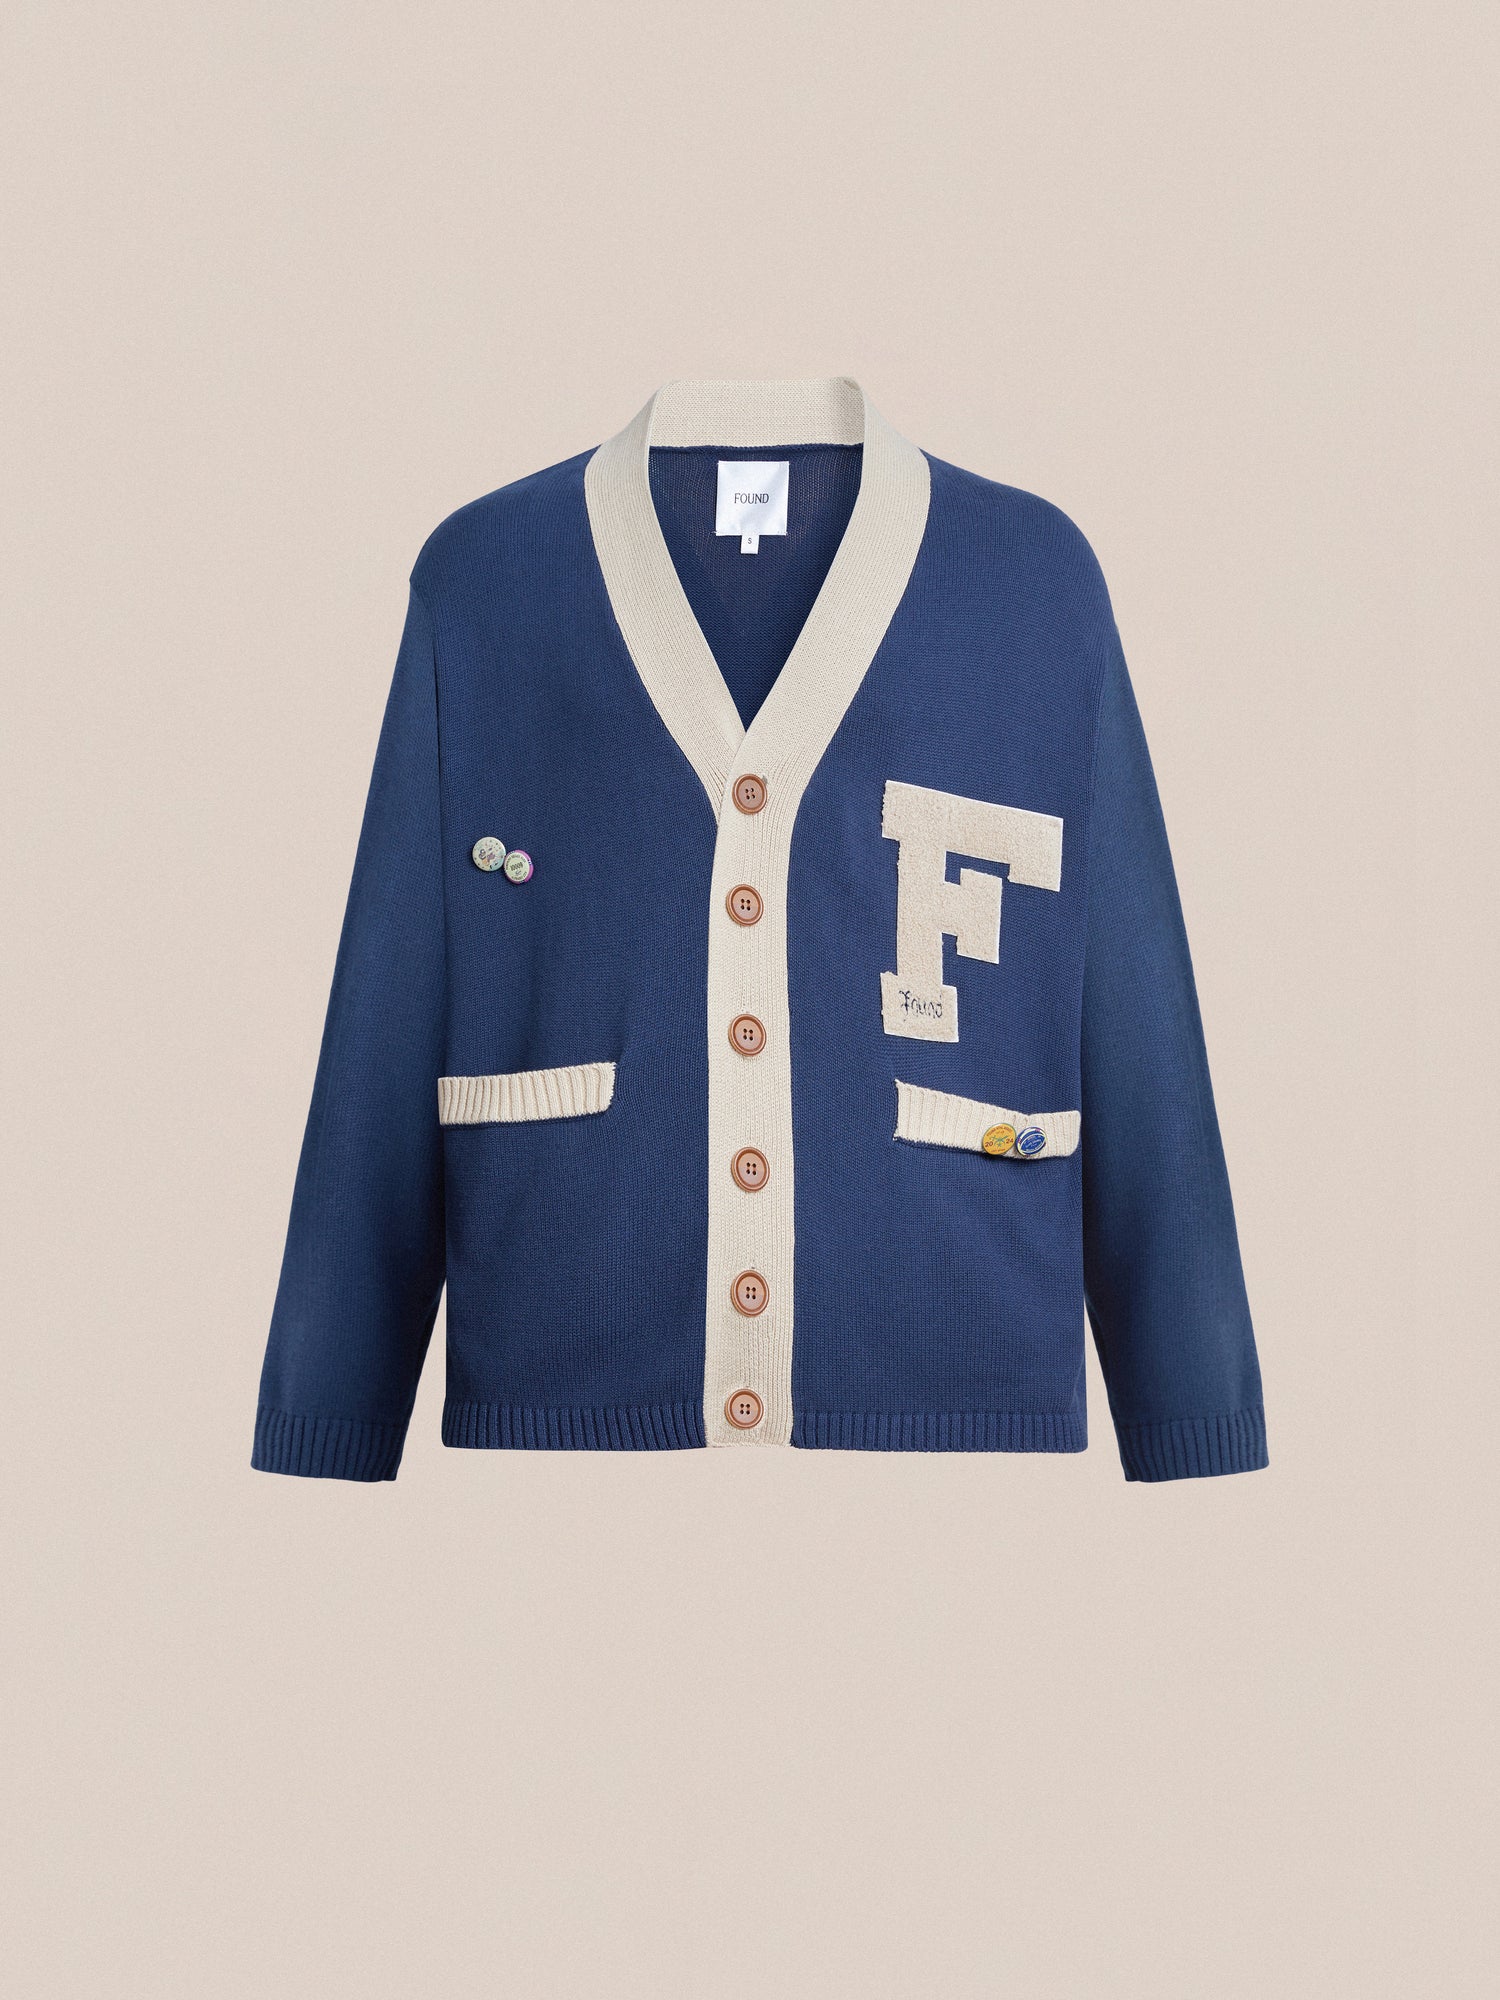 A contemporary Found Varsity Contrast Cardigan with the letter f on it.